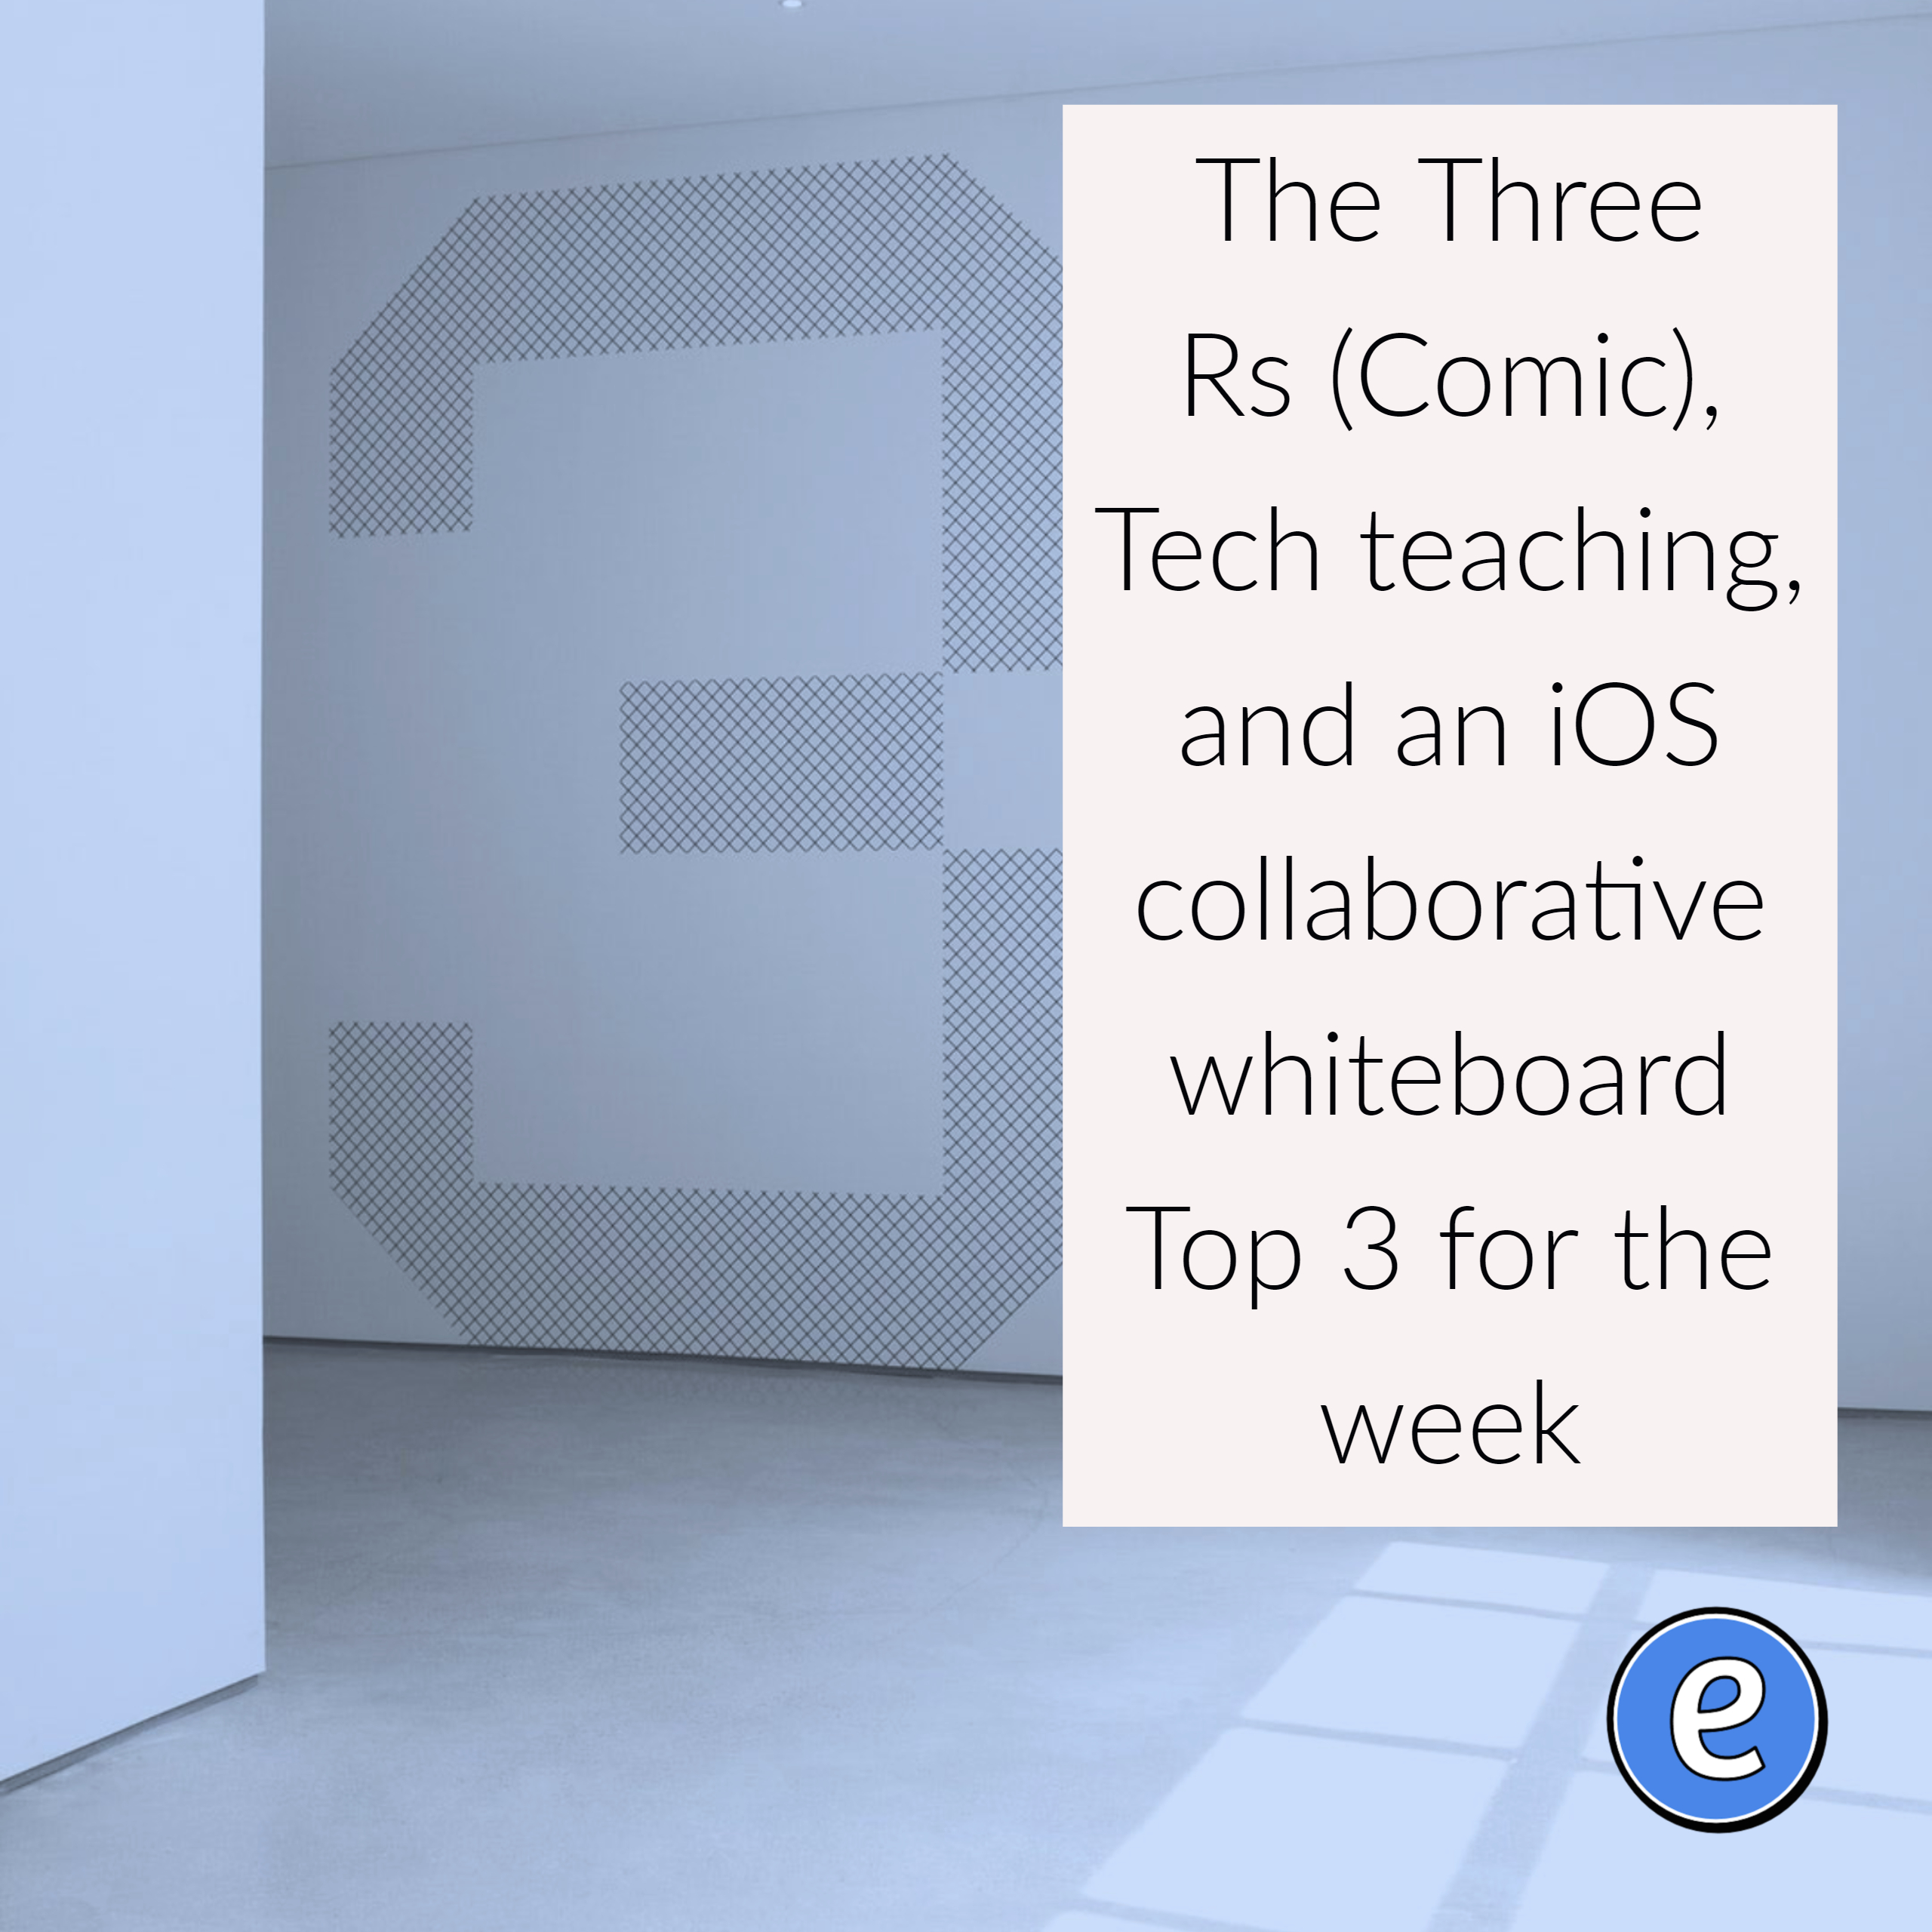 The Three Rs (Comic), Tech teaching, and an iOS collaborative whiteboard – Top 3 for the week